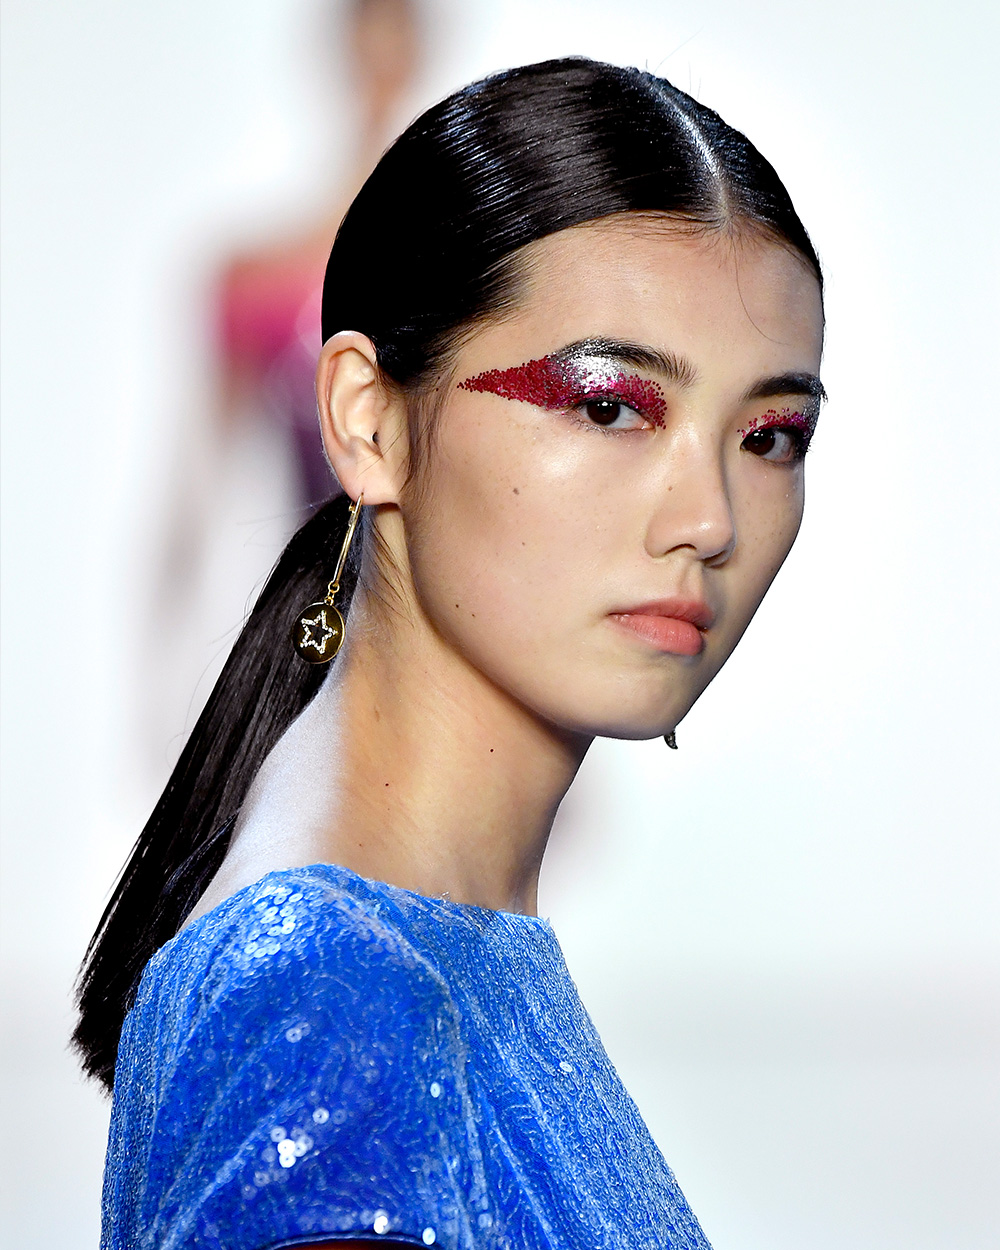 The best beauty looks from NYFW Tadashi Shoji Celestial-inspired hues of blue, silver, red and pink adorned the models' faces at Tadashi Shoji in the form of exaggerated winged eyeshadow.